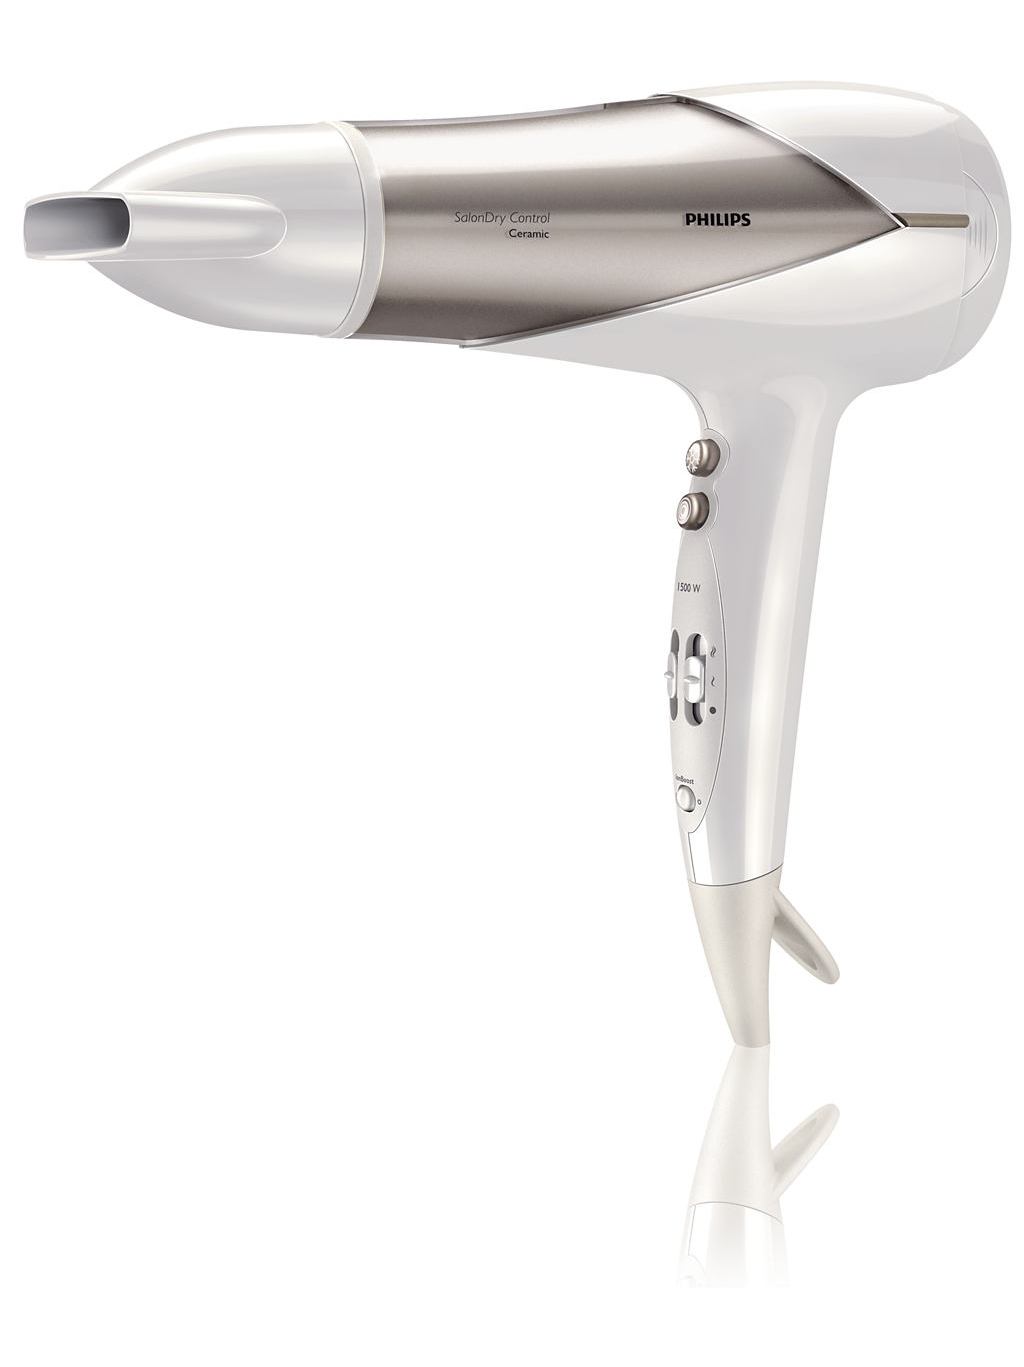 Philips SalonDry Control Hairdryer HP8183